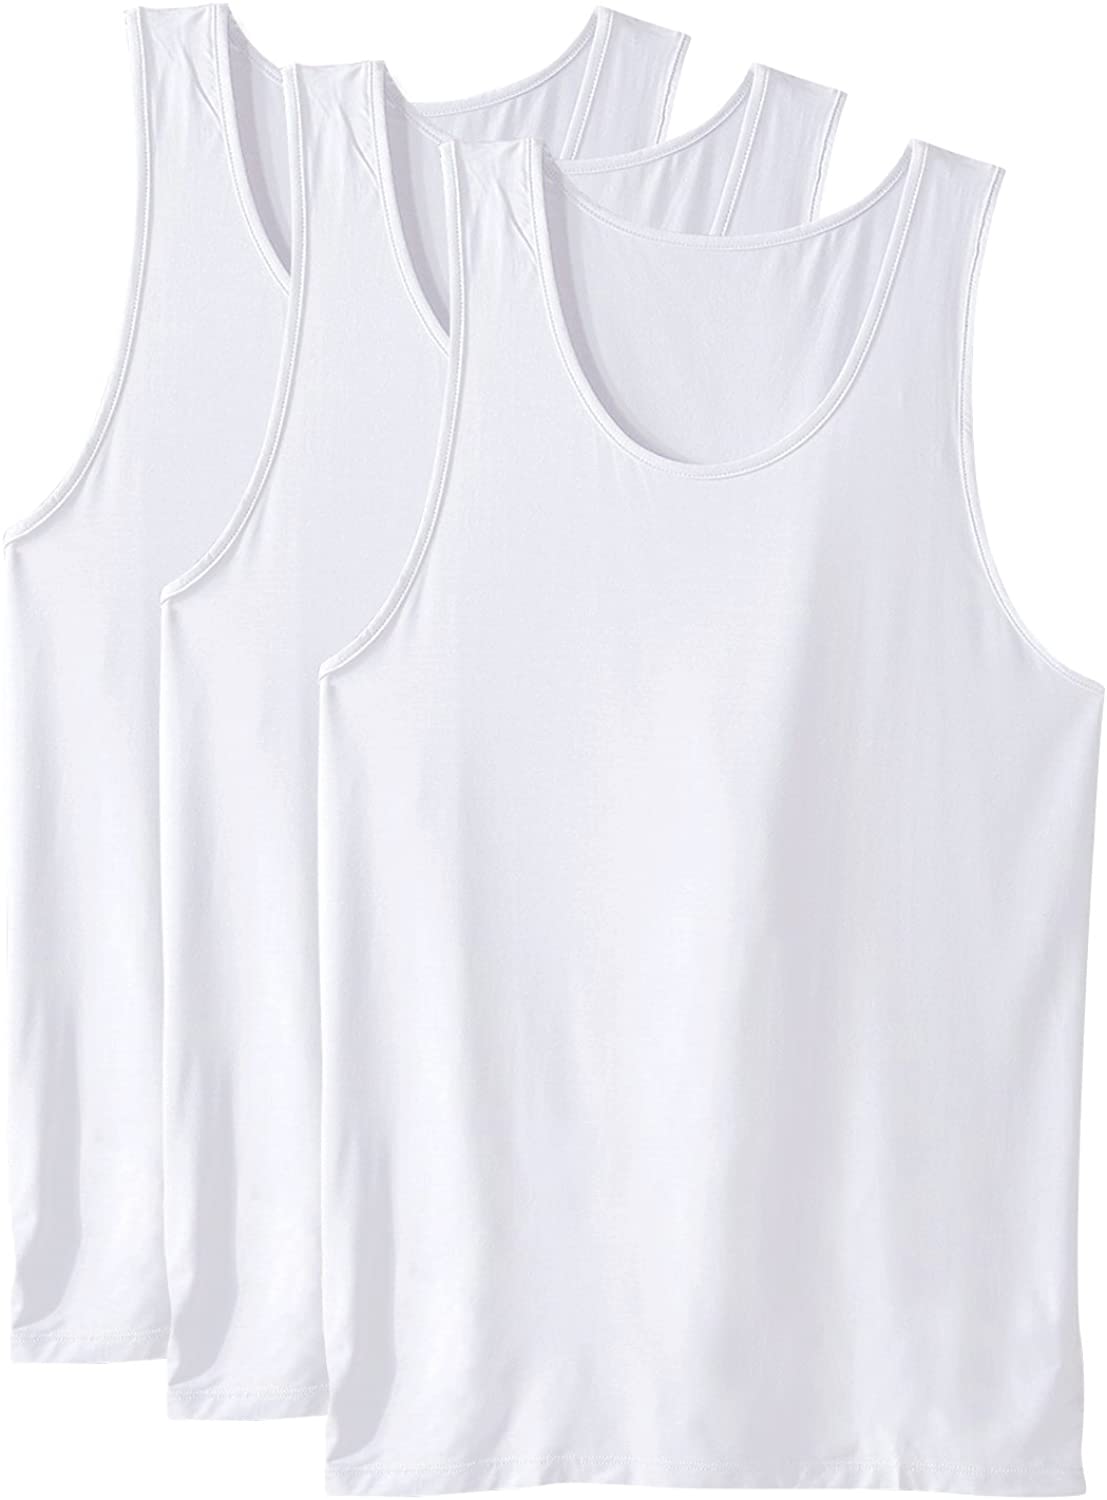 DAVID ARCHY Mens Bamboo Rayon & Cotton Undershirts Crew Neck Tank Tops in 3 or 4 Pack 